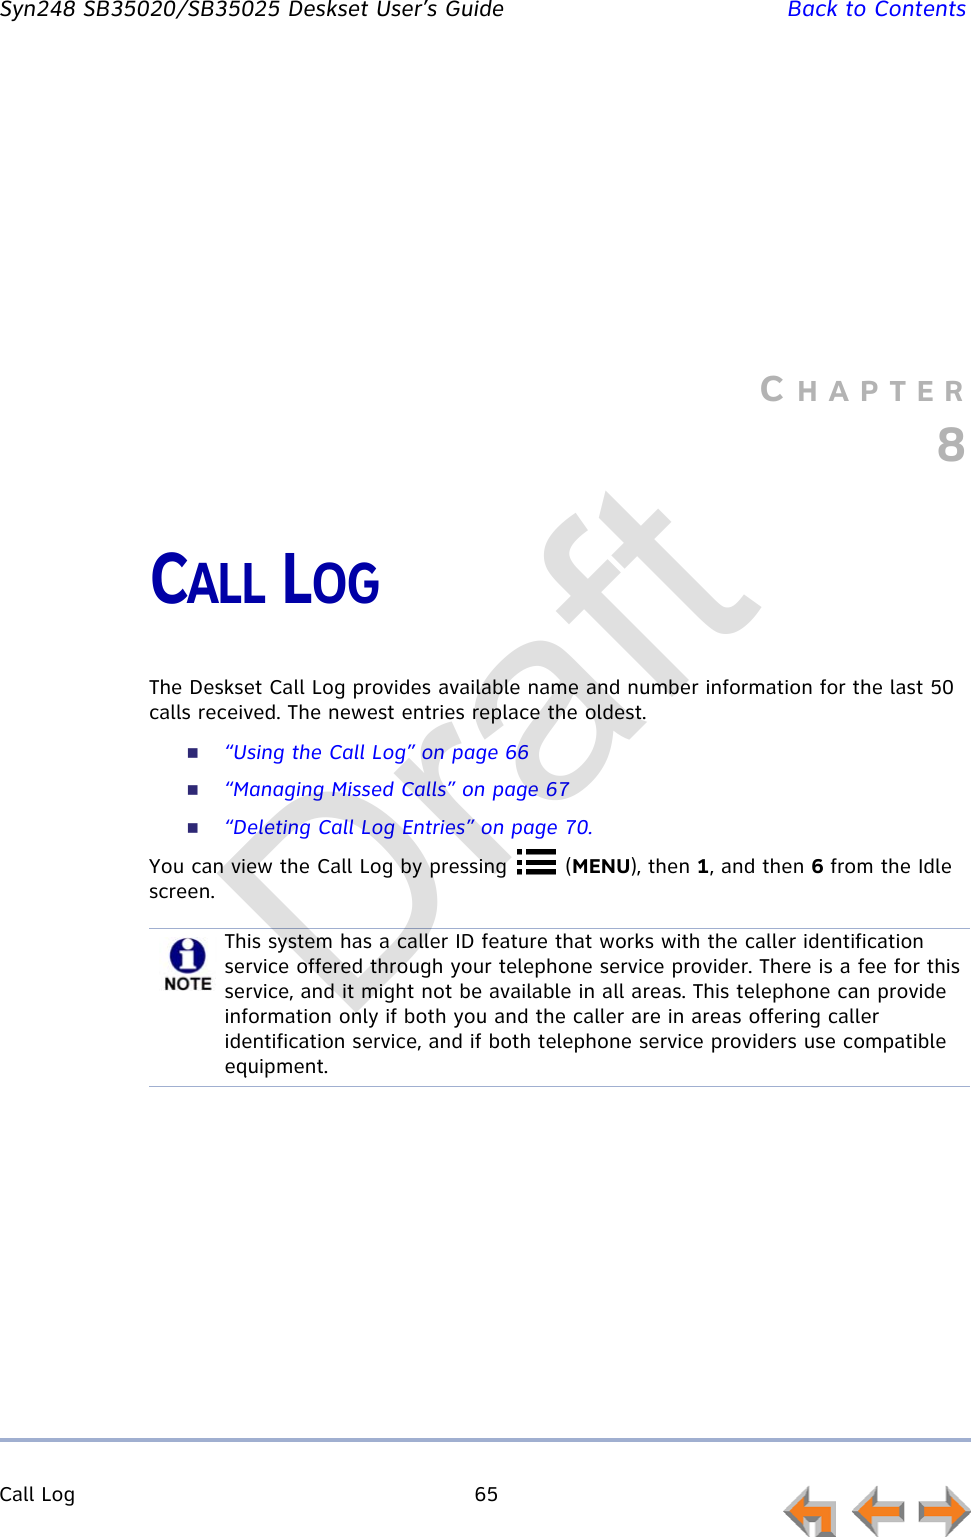 Call Log 65         Syn248 SB35020/SB35025 Deskset User’s Guide Back to ContentsCHAPTER8CALL LOGThe Deskset Call Log provides available name and number information for the last 50 calls received. The newest entries replace the oldest.“Using the Call Log” on page 66“Managing Missed Calls” on page 67“Deleting Call Log Entries” on page 70.You can view the Call Log by pressing   (MENU), then 1, and then 6 from the Idle screen.This system has a caller ID feature that works with the caller identification service offered through your telephone service provider. There is a fee for this service, and it might not be available in all areas. This telephone can provide information only if both you and the caller are in areas offering caller identification service, and if both telephone service providers use compatible equipment.Draft